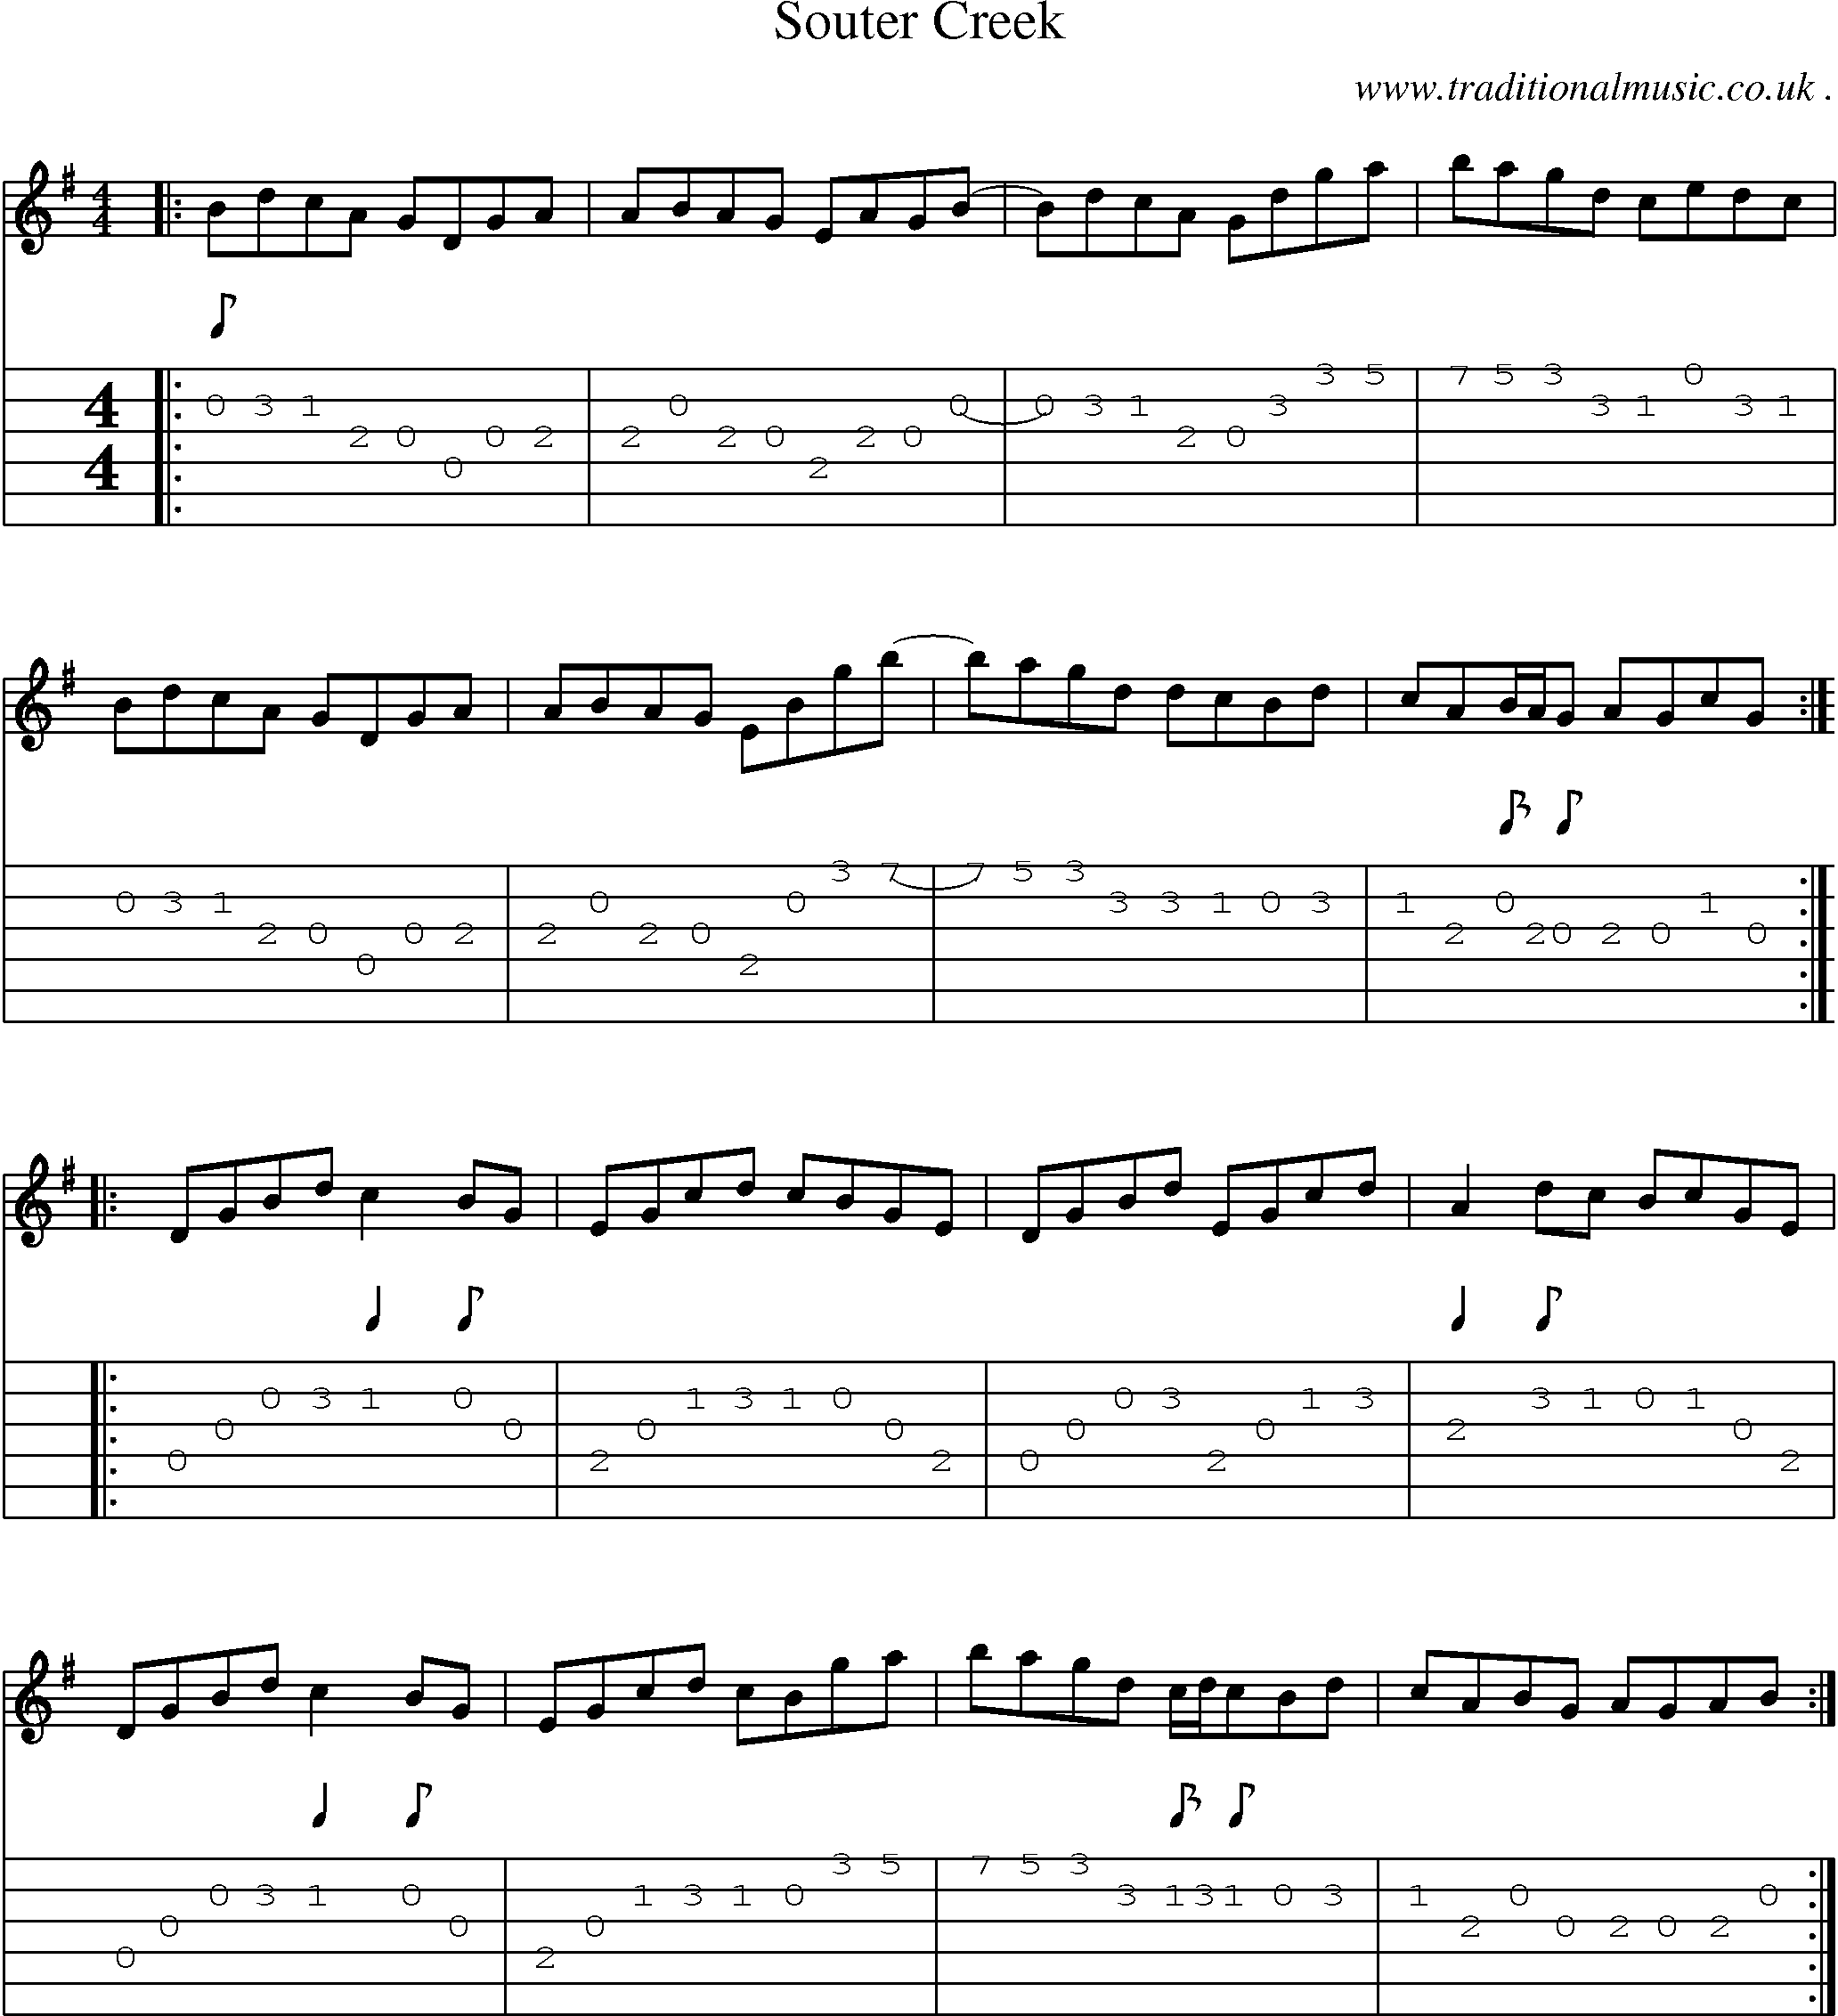 Sheet-Music and Guitar Tabs for Souter Creek